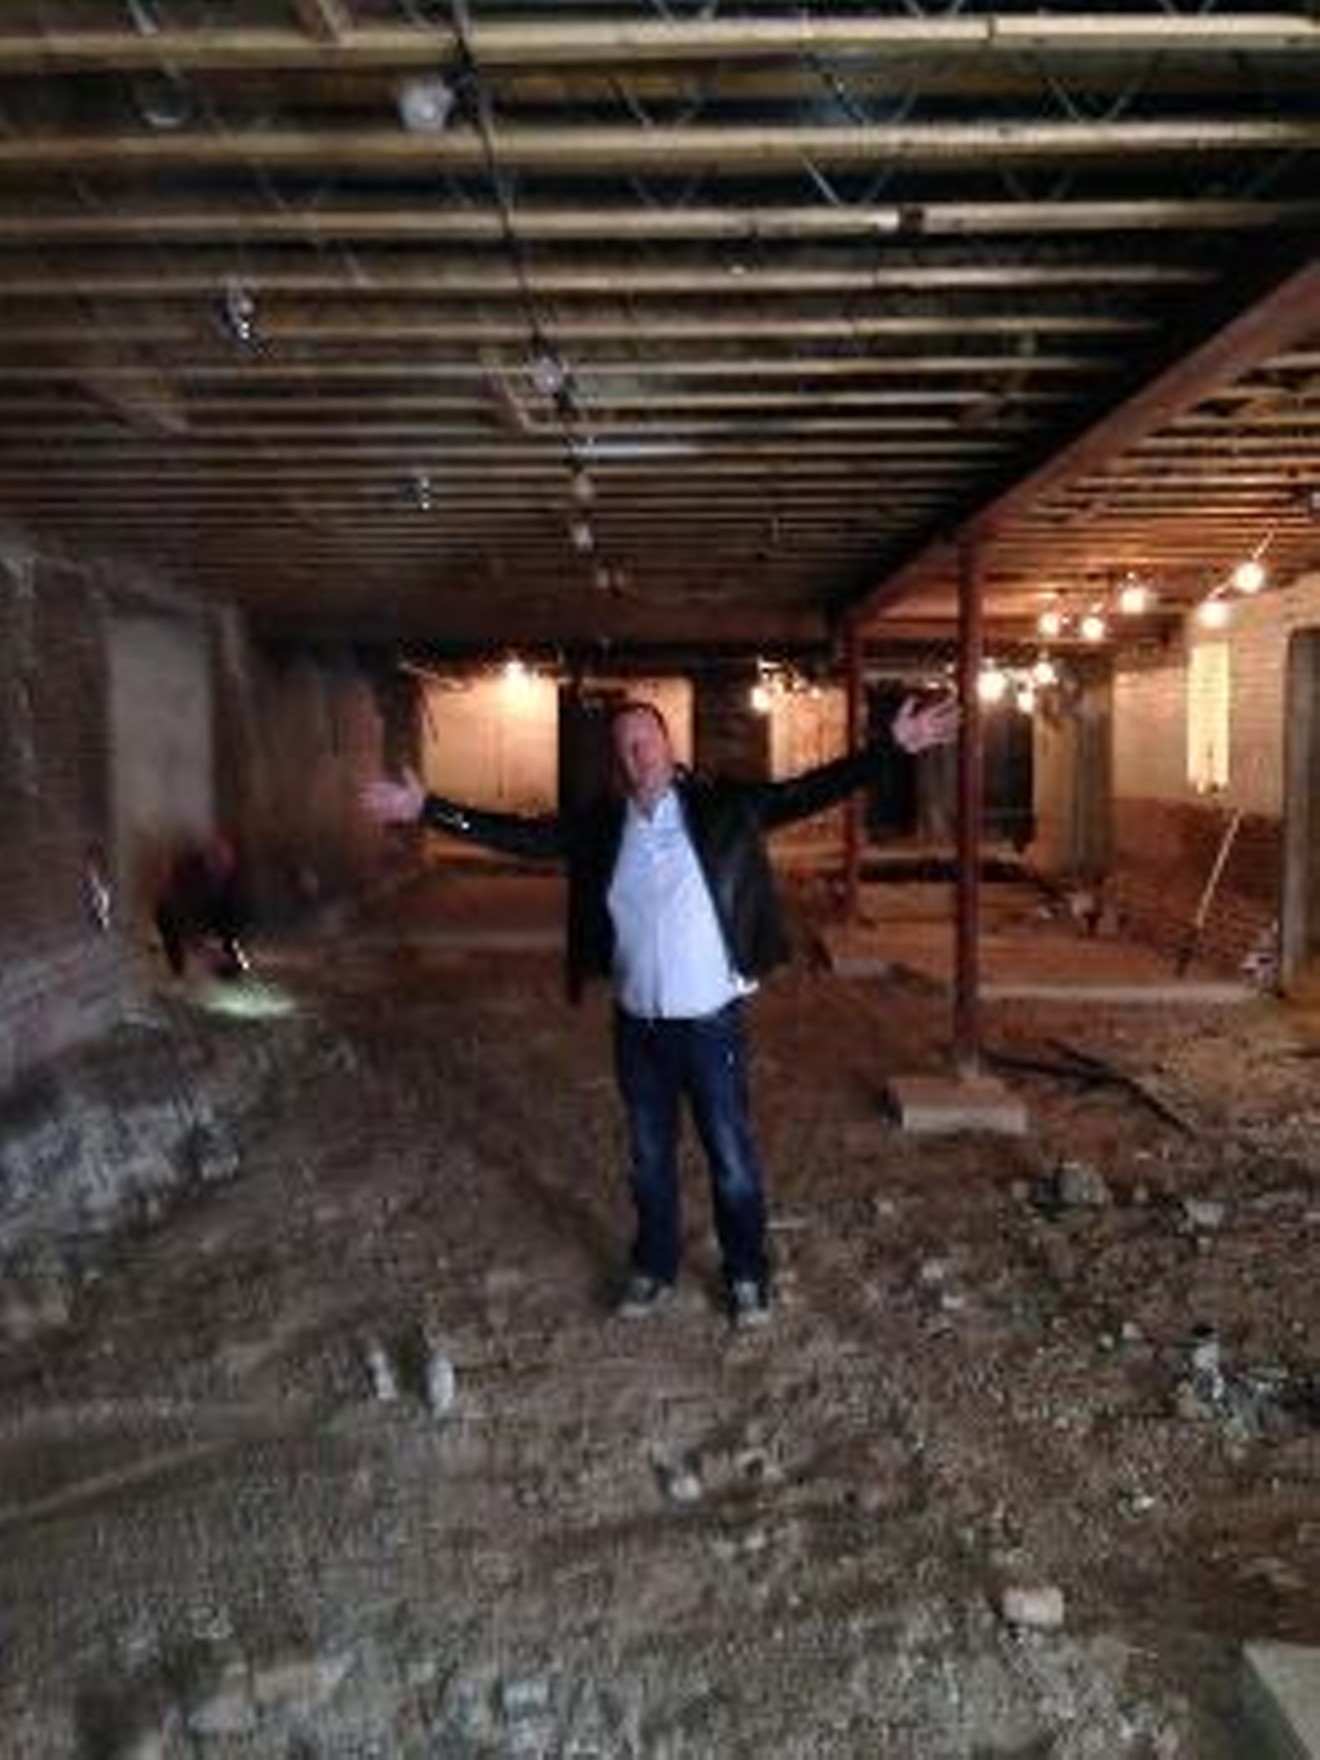 Chef/restaurateur Michael Shiell in the former Cafe Promenade space during the construction of Milk & Honey.